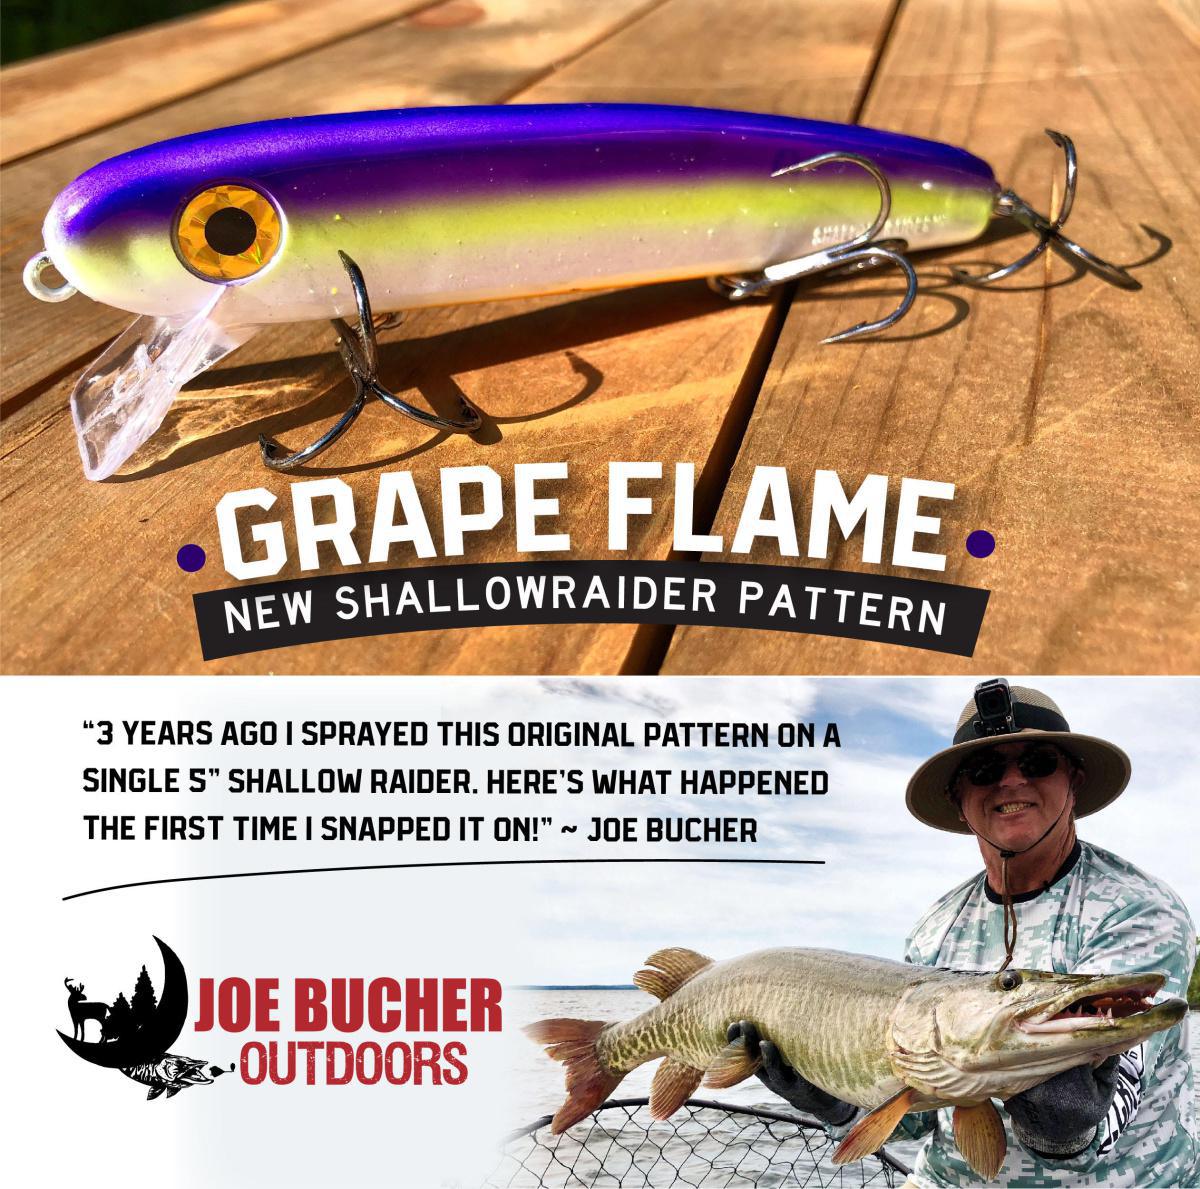 The Grape Flame Shallow Raider Has Arrived !!!!